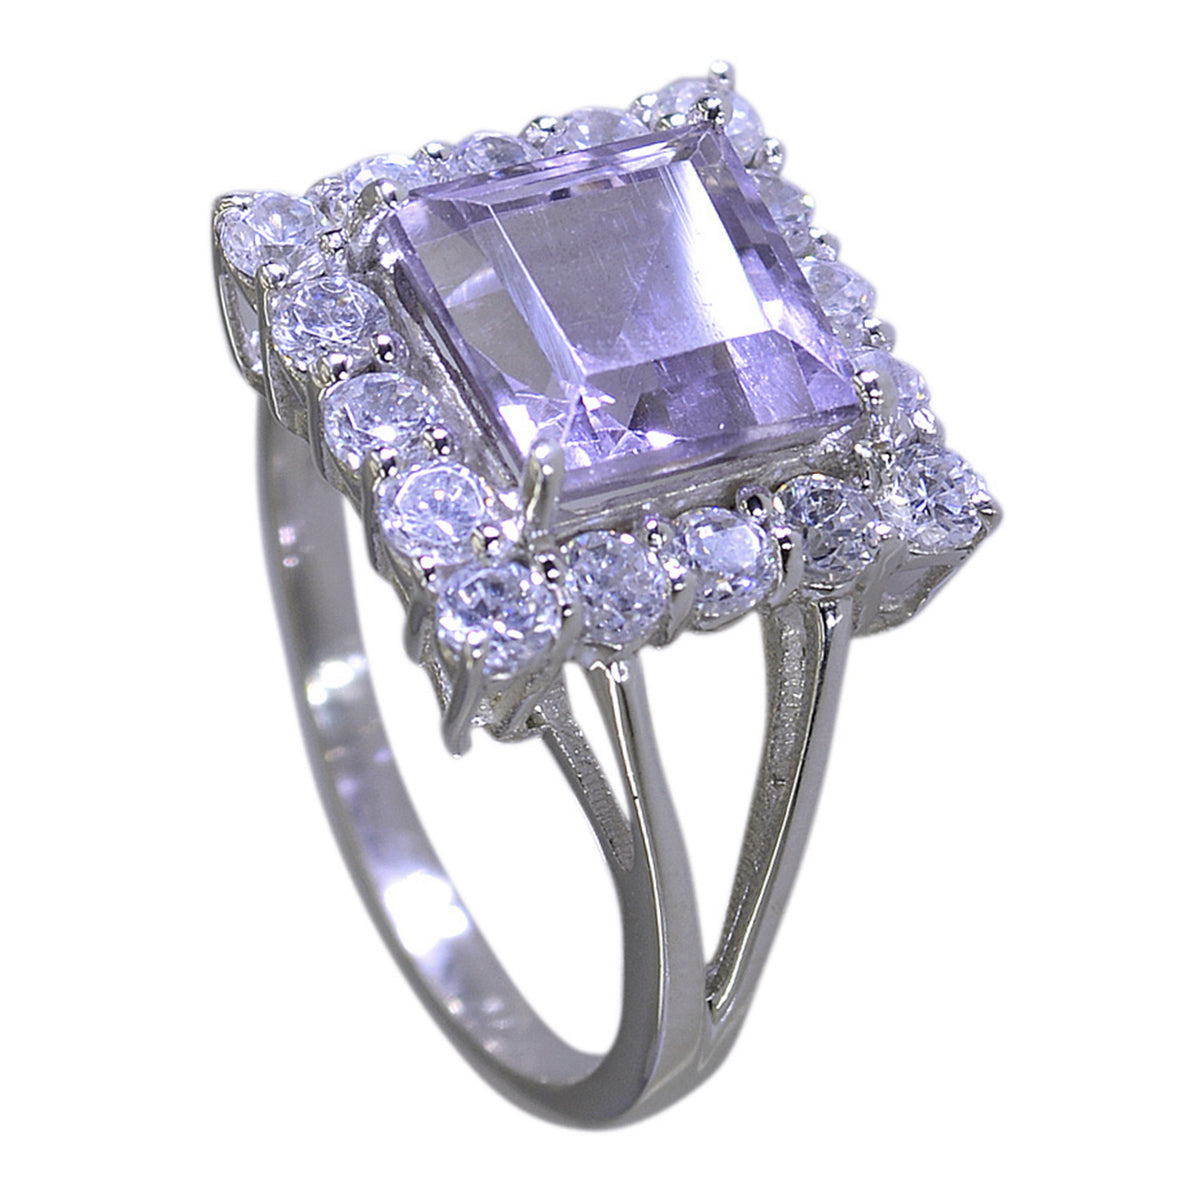 Gorgeous Gemstones Amethyst 925 Sterling Silver Ring Gift For Mom